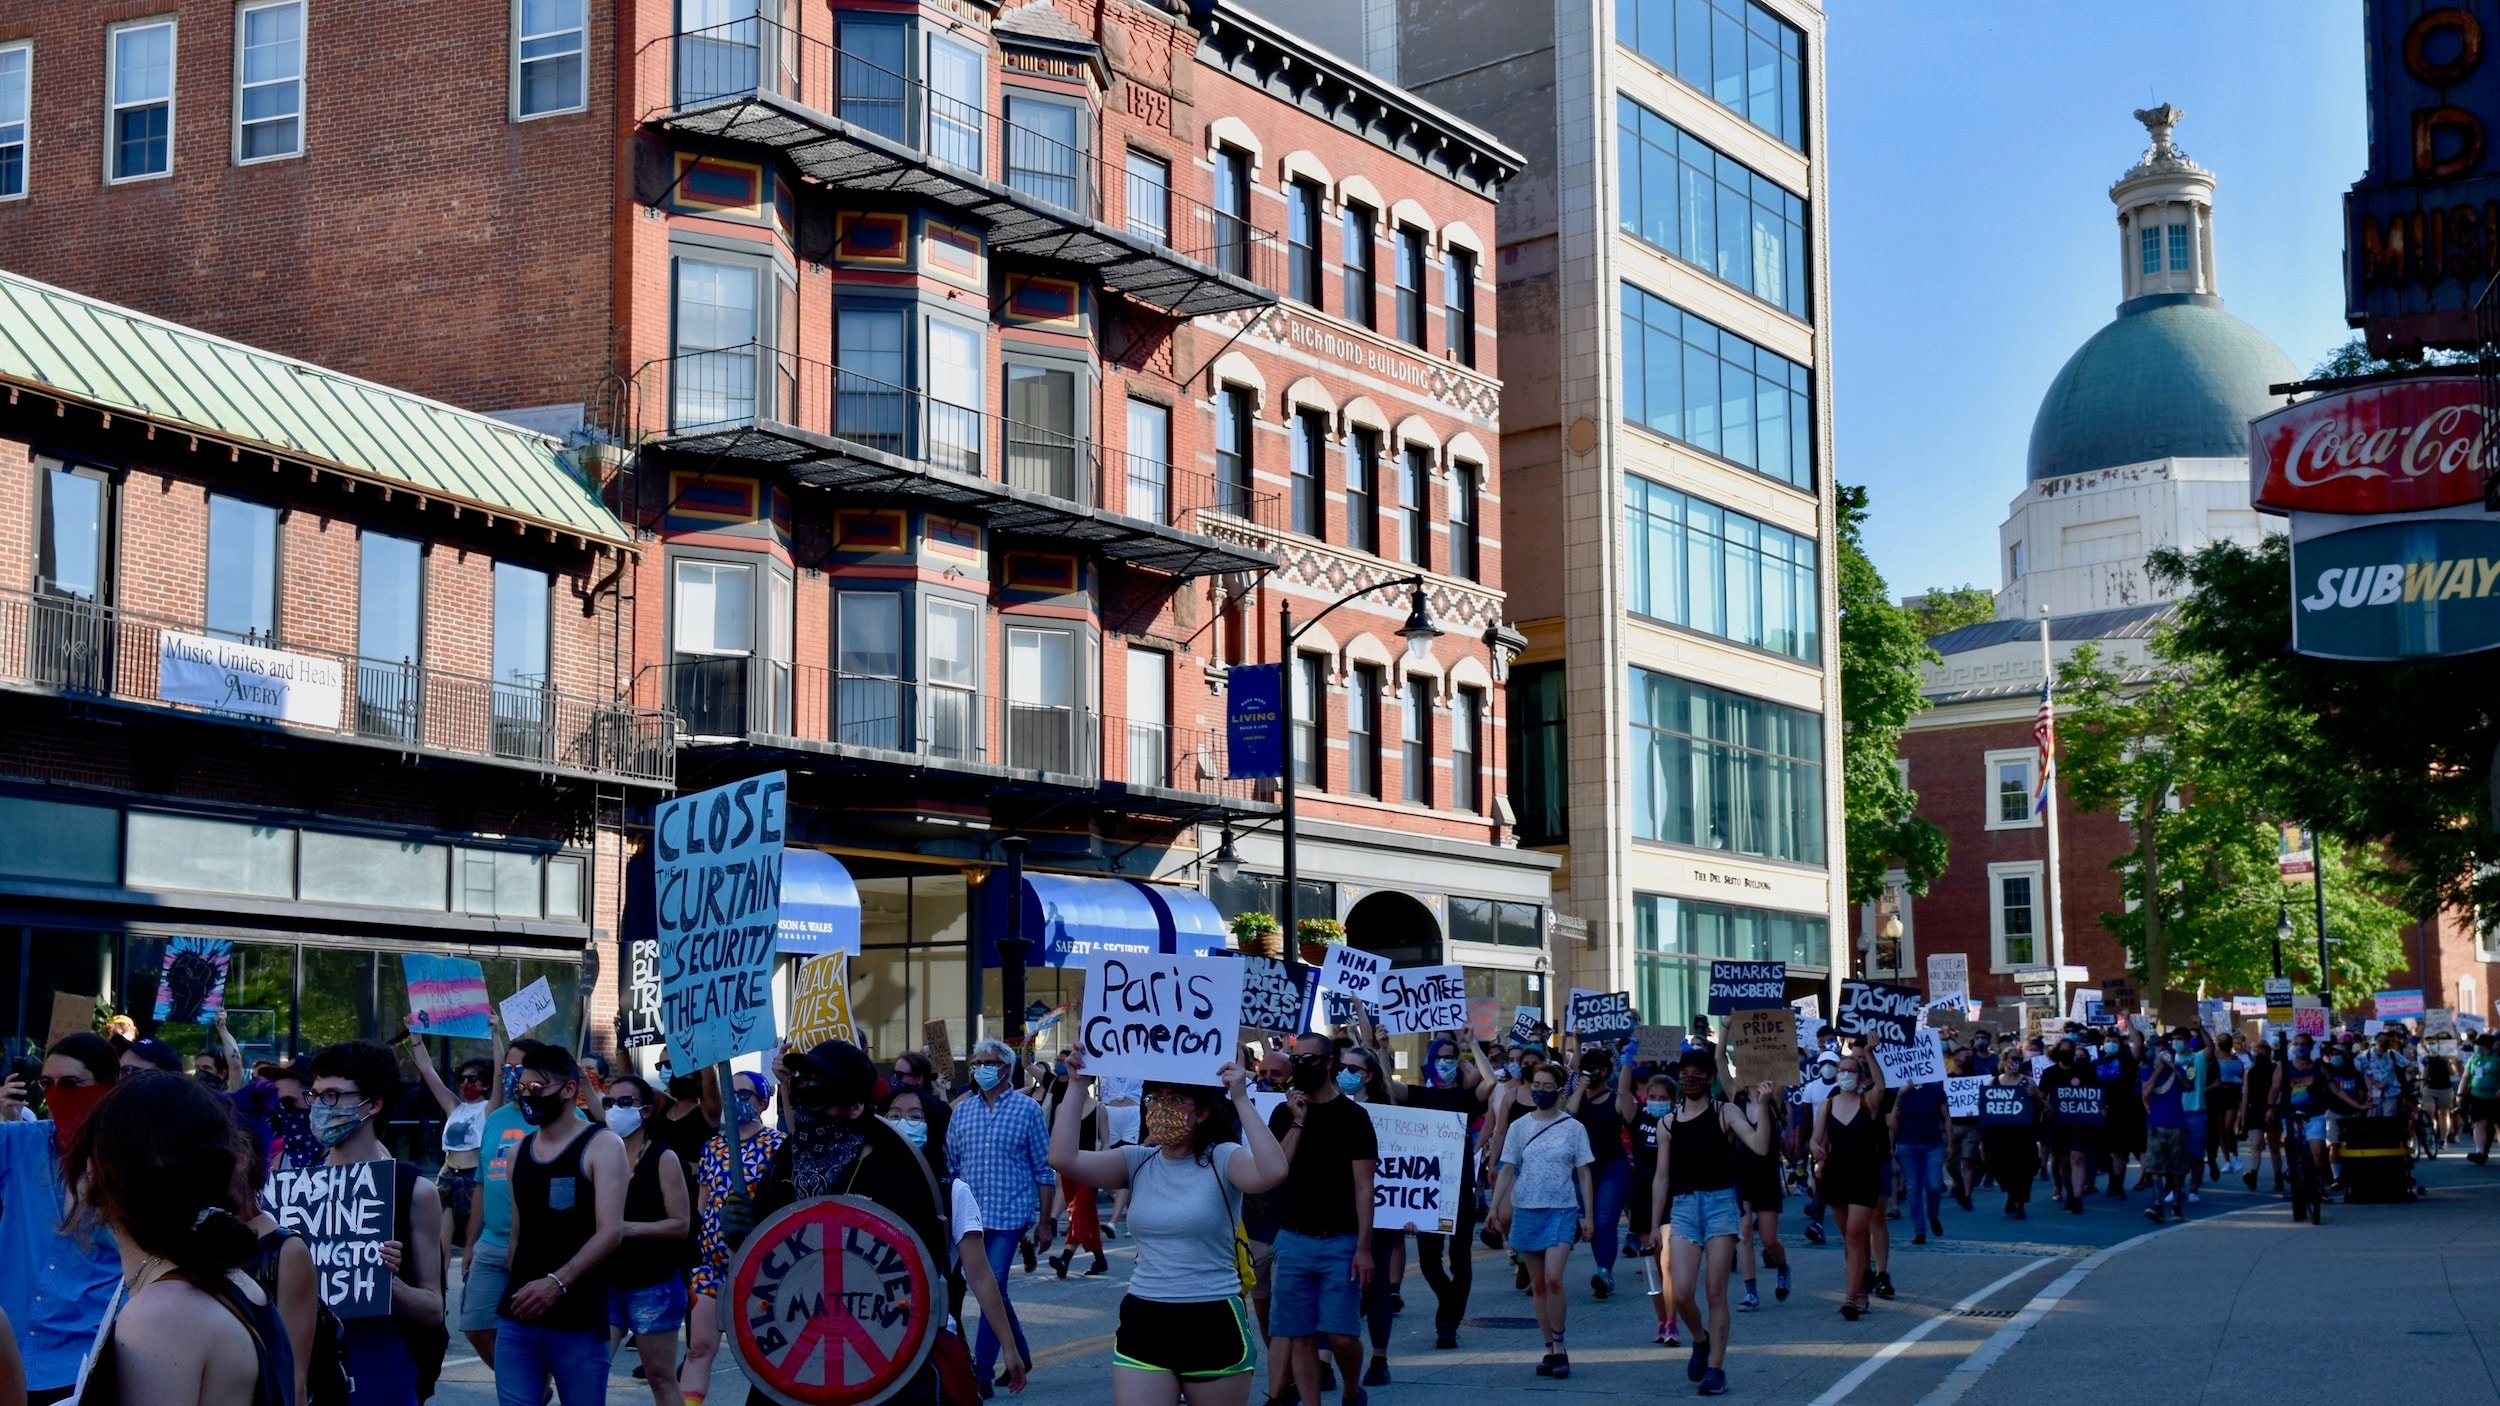 Rhode Island Pride 2020 Resistance and Resilience Rally for QTPOC